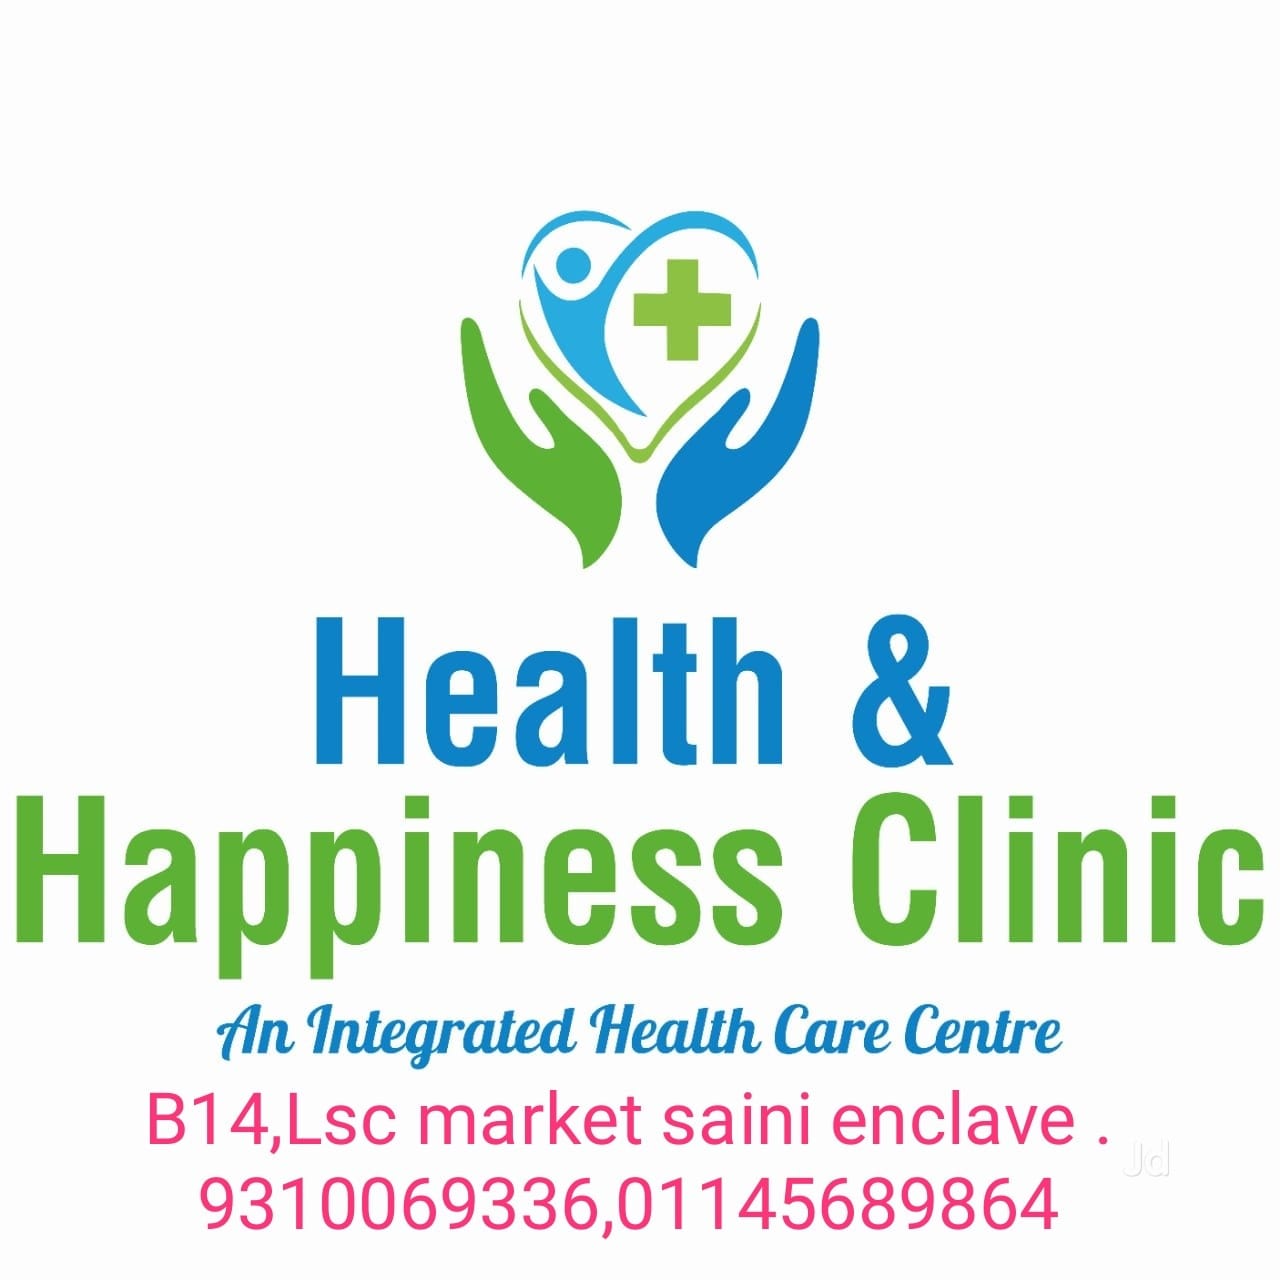 Health & Happiness Clinic